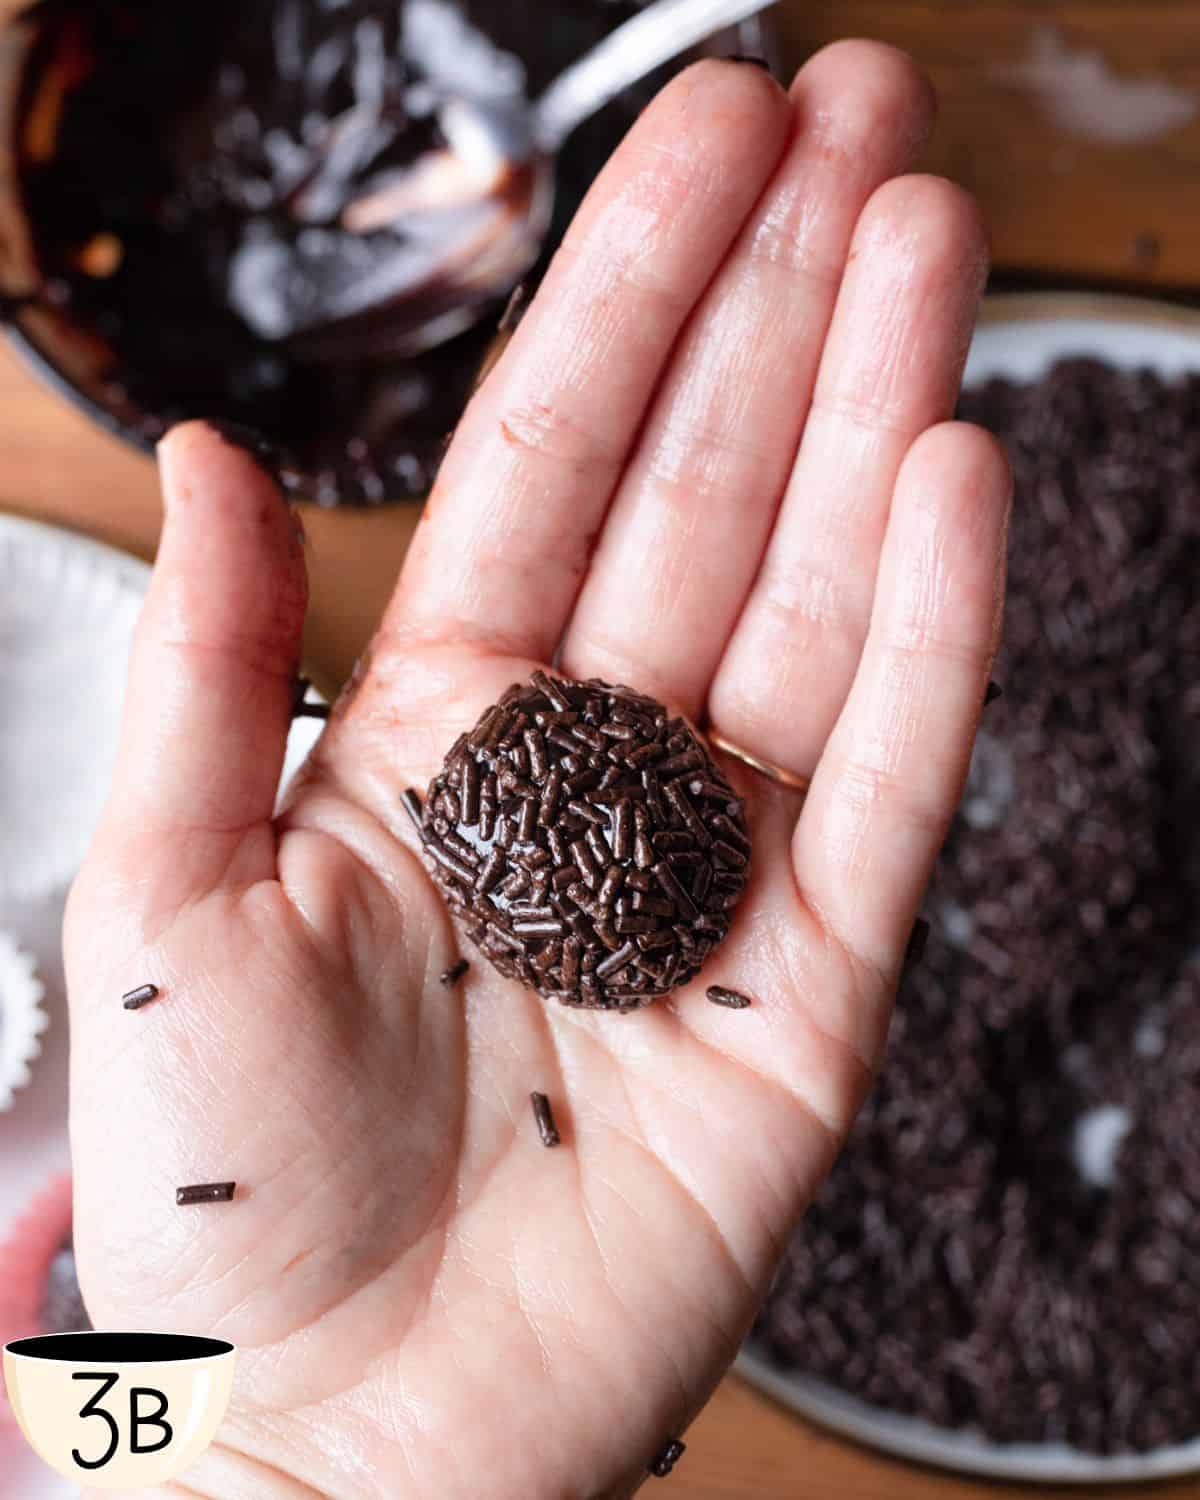 A human hand with a chocolate truffle in the center that has been rolled in chocolate sprinkles.